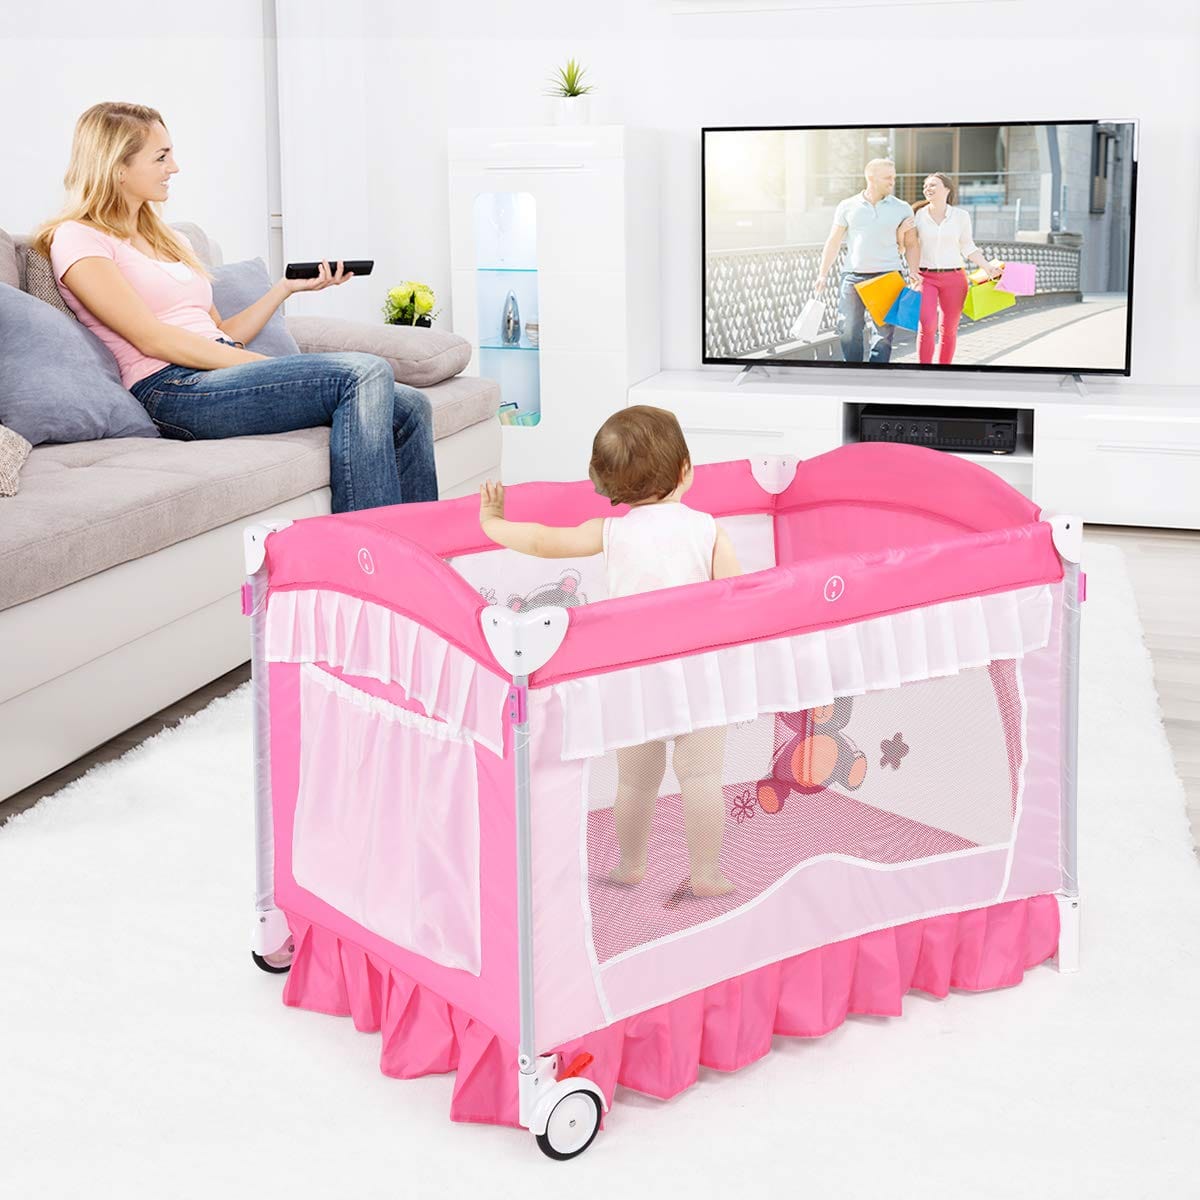 Proactive Baby Baby & Toddler BabyJoy Nursery Center with Foldable Bassinet, Changing Table, Mesh Net with Cute Whirling Toys